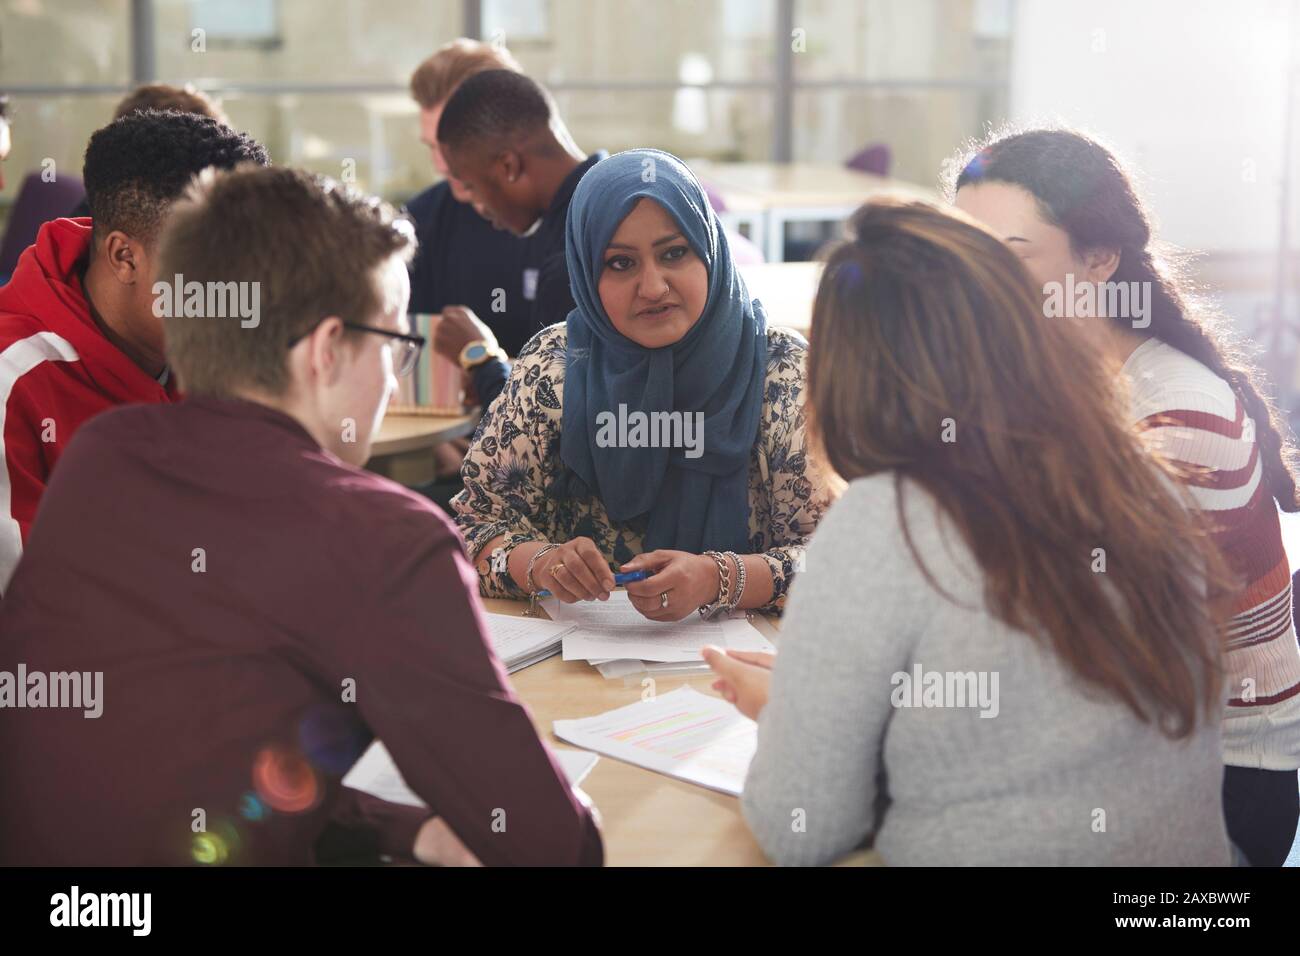 College students talking and studying in classroom Stock Photo